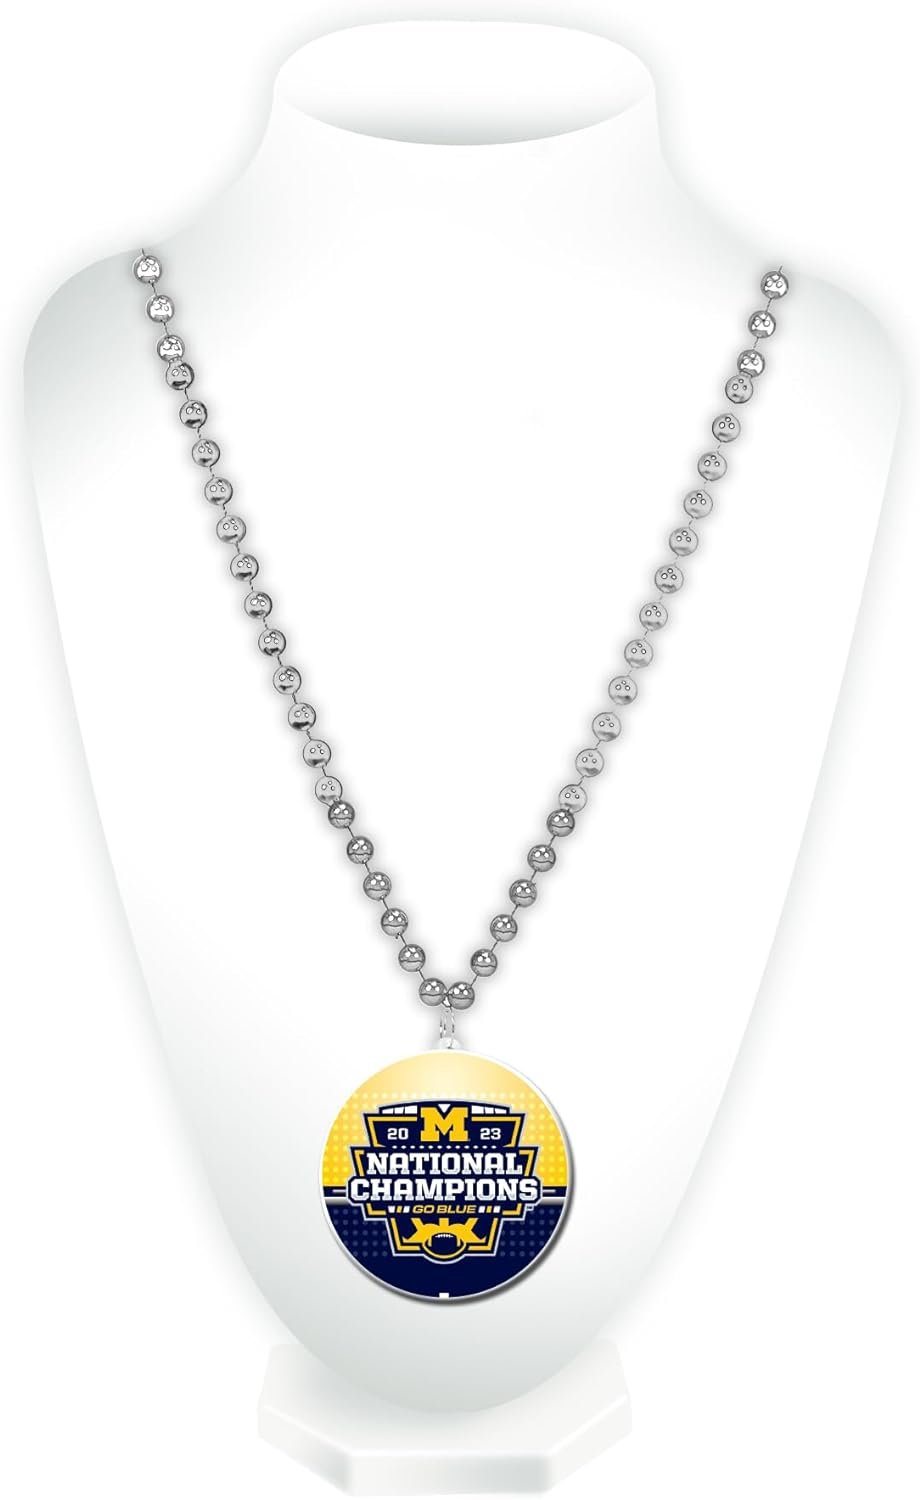 University of Michigan Wolverines 2024 Champions Bead Necklace with Round Medallion, Great Game Day Accessory, 3x24 Inch